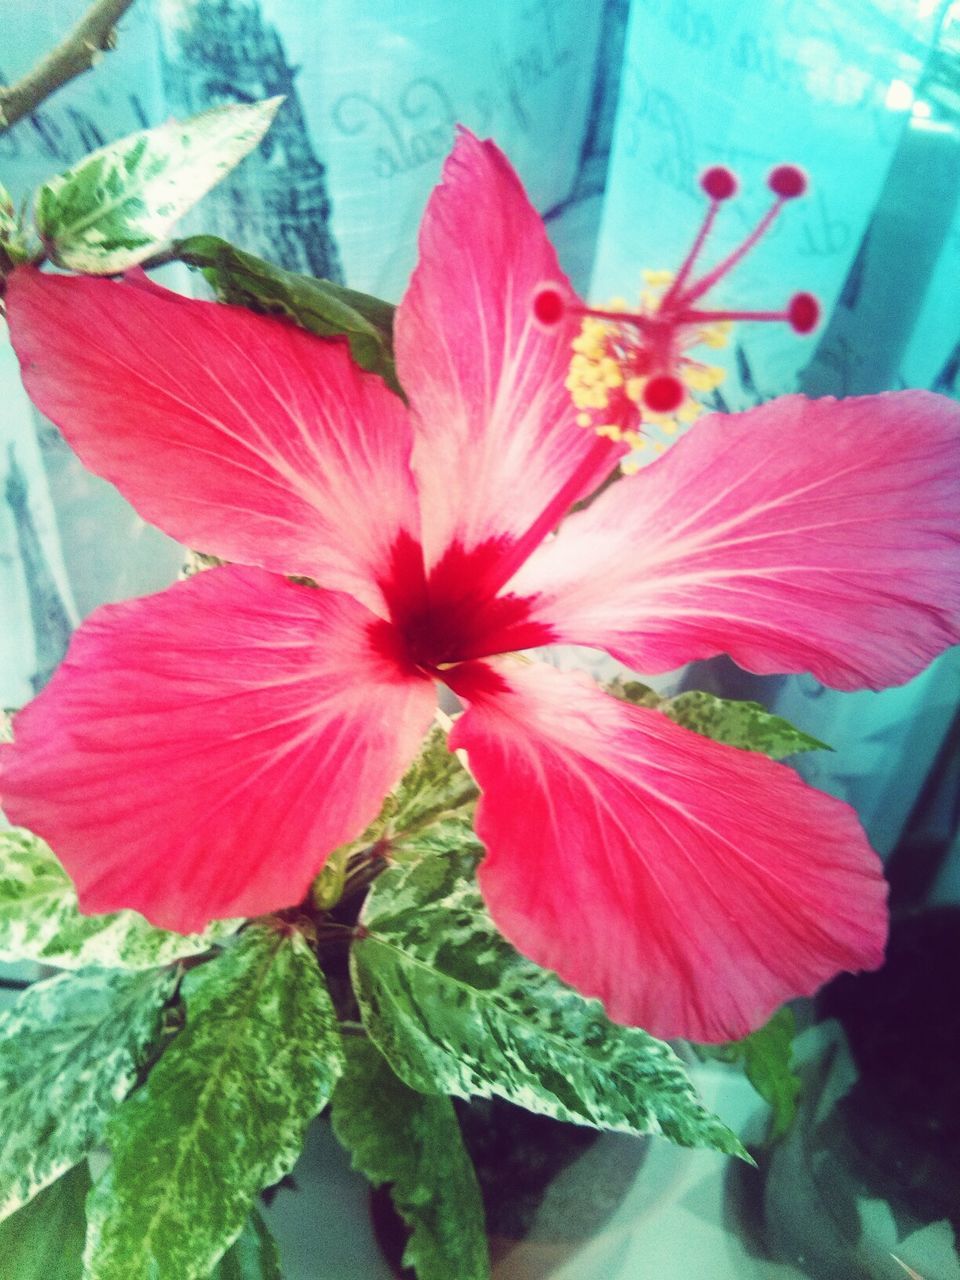 flower, petal, freshness, flower head, fragility, growth, beauty in nature, red, plant, leaf, blooming, close-up, nature, stamen, pollen, hibiscus, single flower, in bloom, focus on foreground, pink color